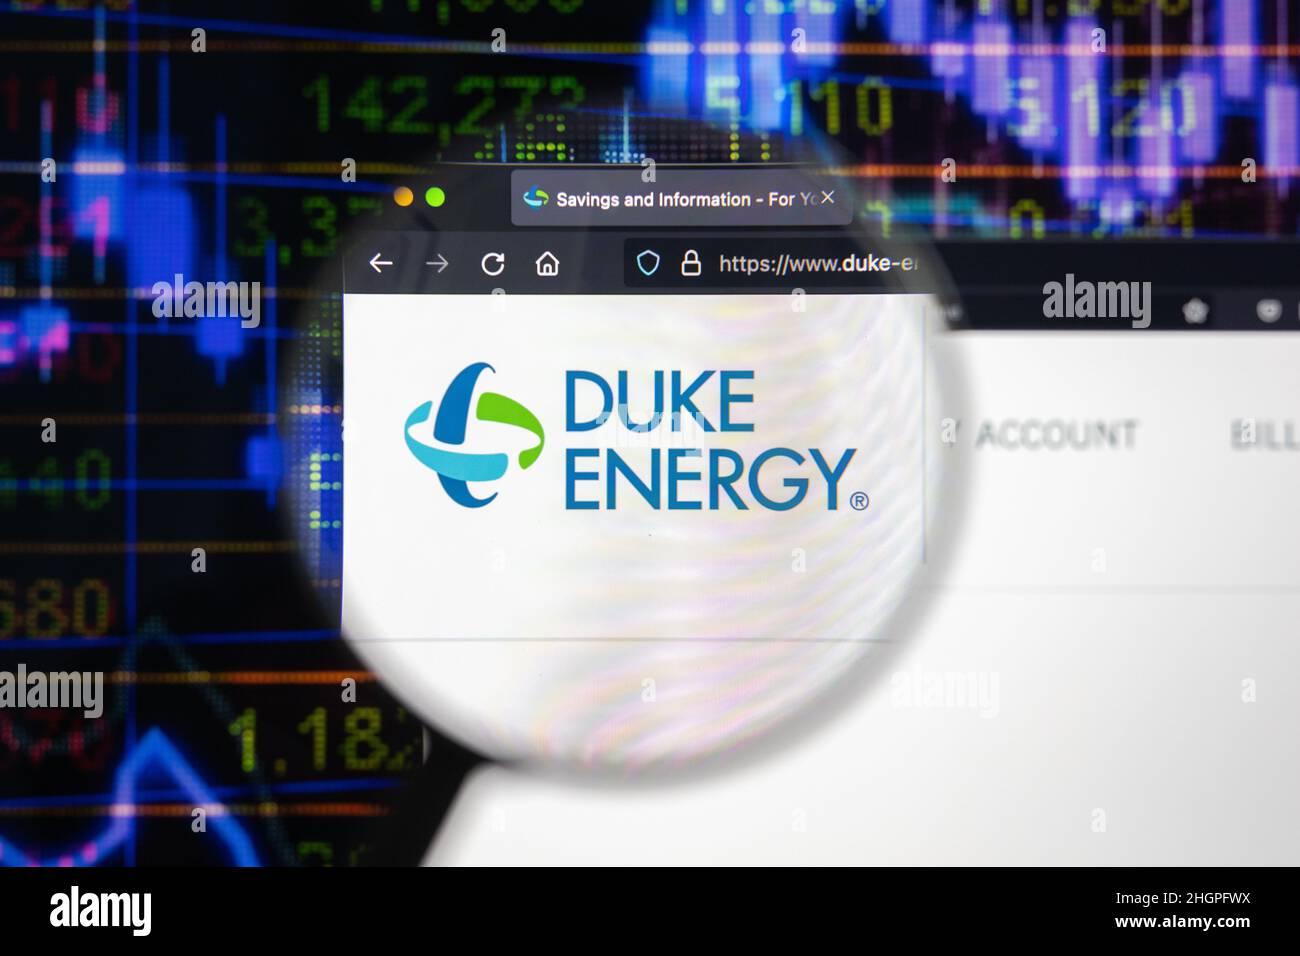 Duke Energy company logo on a website with blurry stock market developments in the background, seen on a computer screen through a magnifying glass. Stock Photo